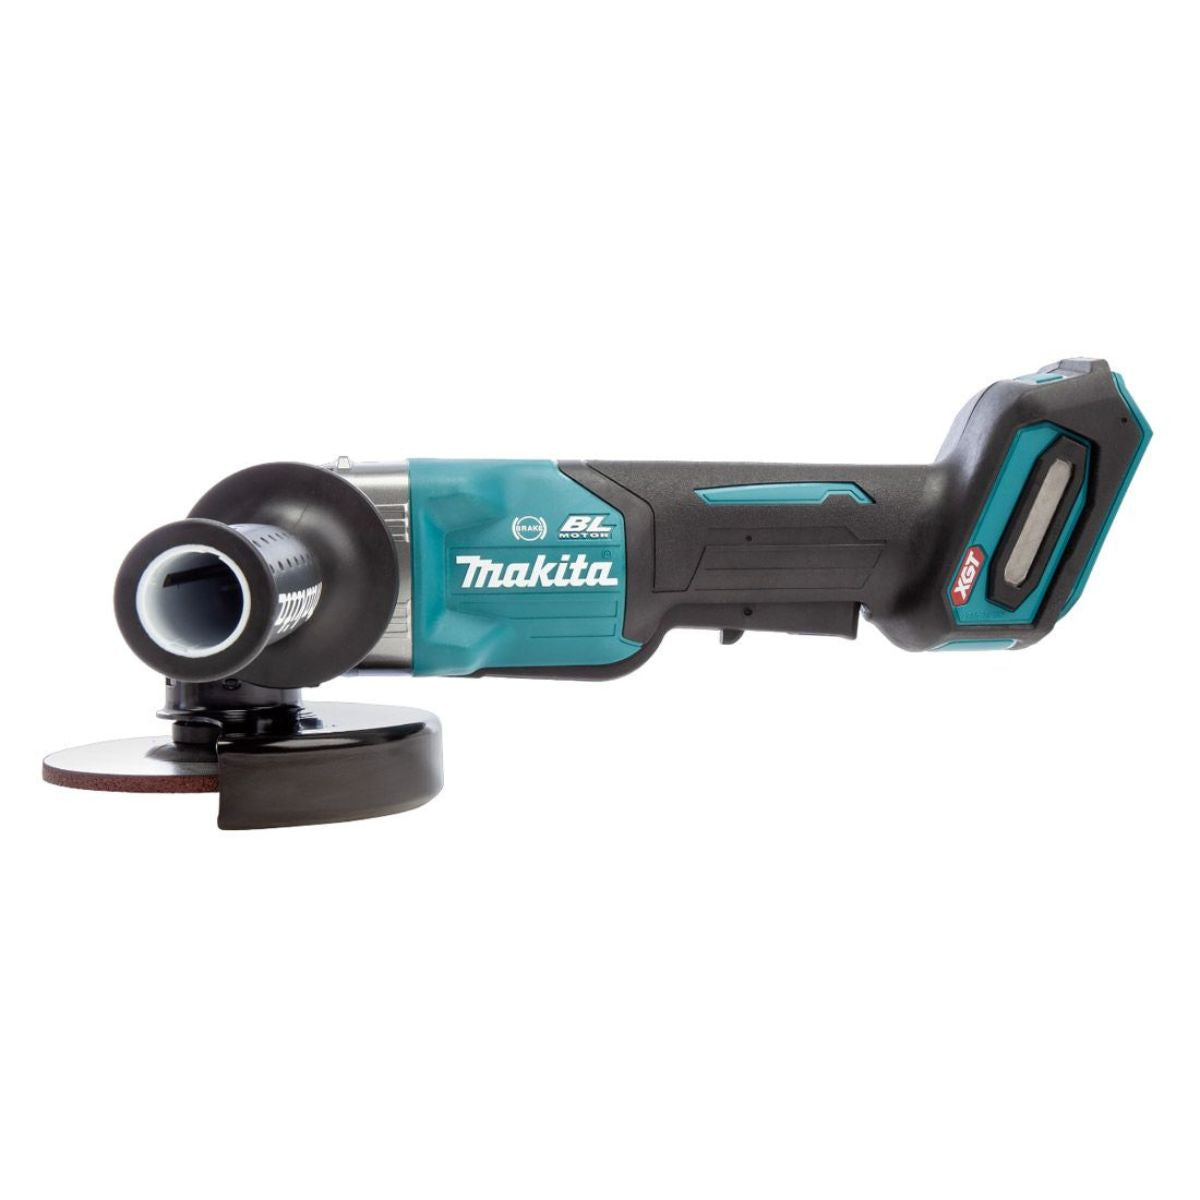 Makita GA013GZ01 40v XGT Max 125mm Brushless Angle Grinder Body Only With Carry Case